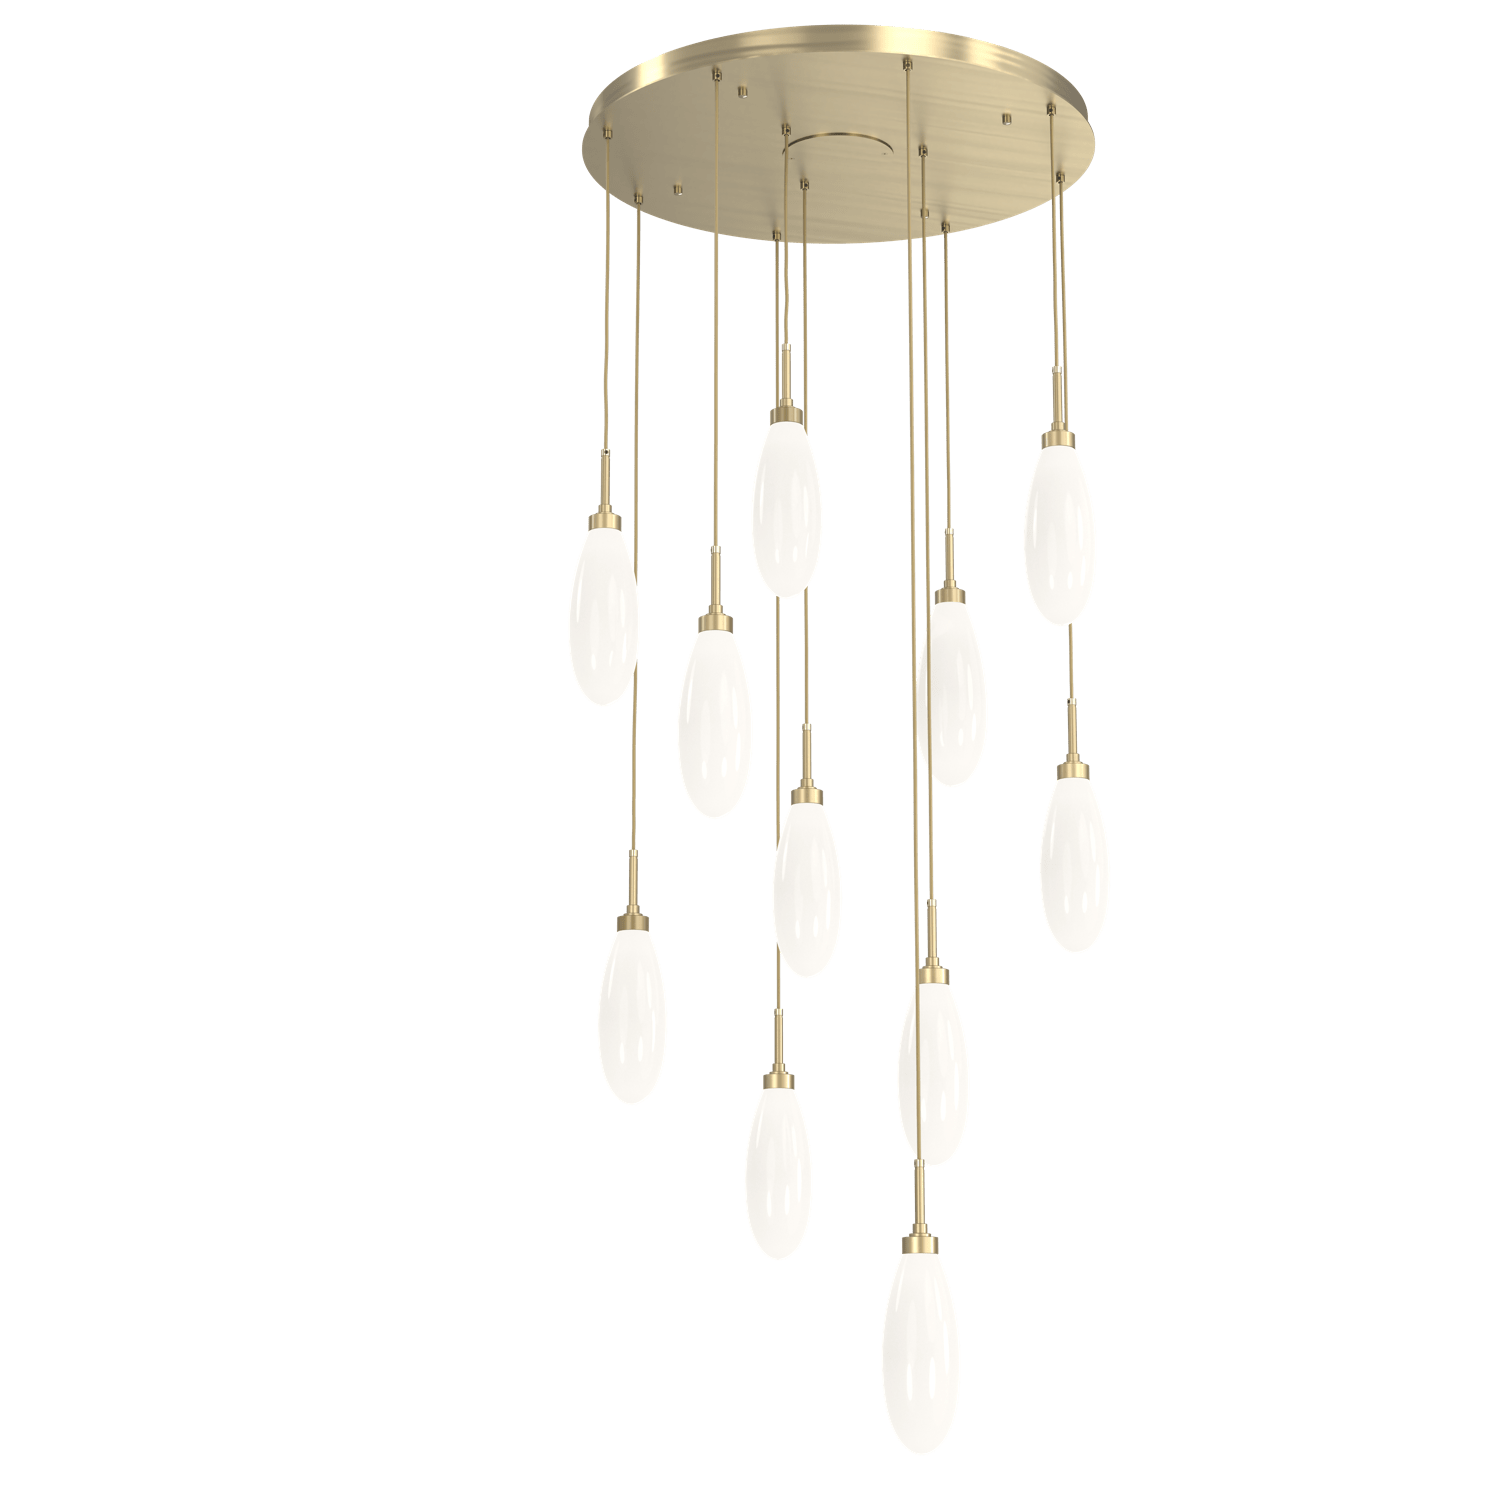 CHB0071-11-HB-WL-LL-Hammerton-Studio-Fiori-11-light-round-pendant-chandelier-with-heritage-brass-finish-and-opal-white-glass-shades-and-LED-lamping